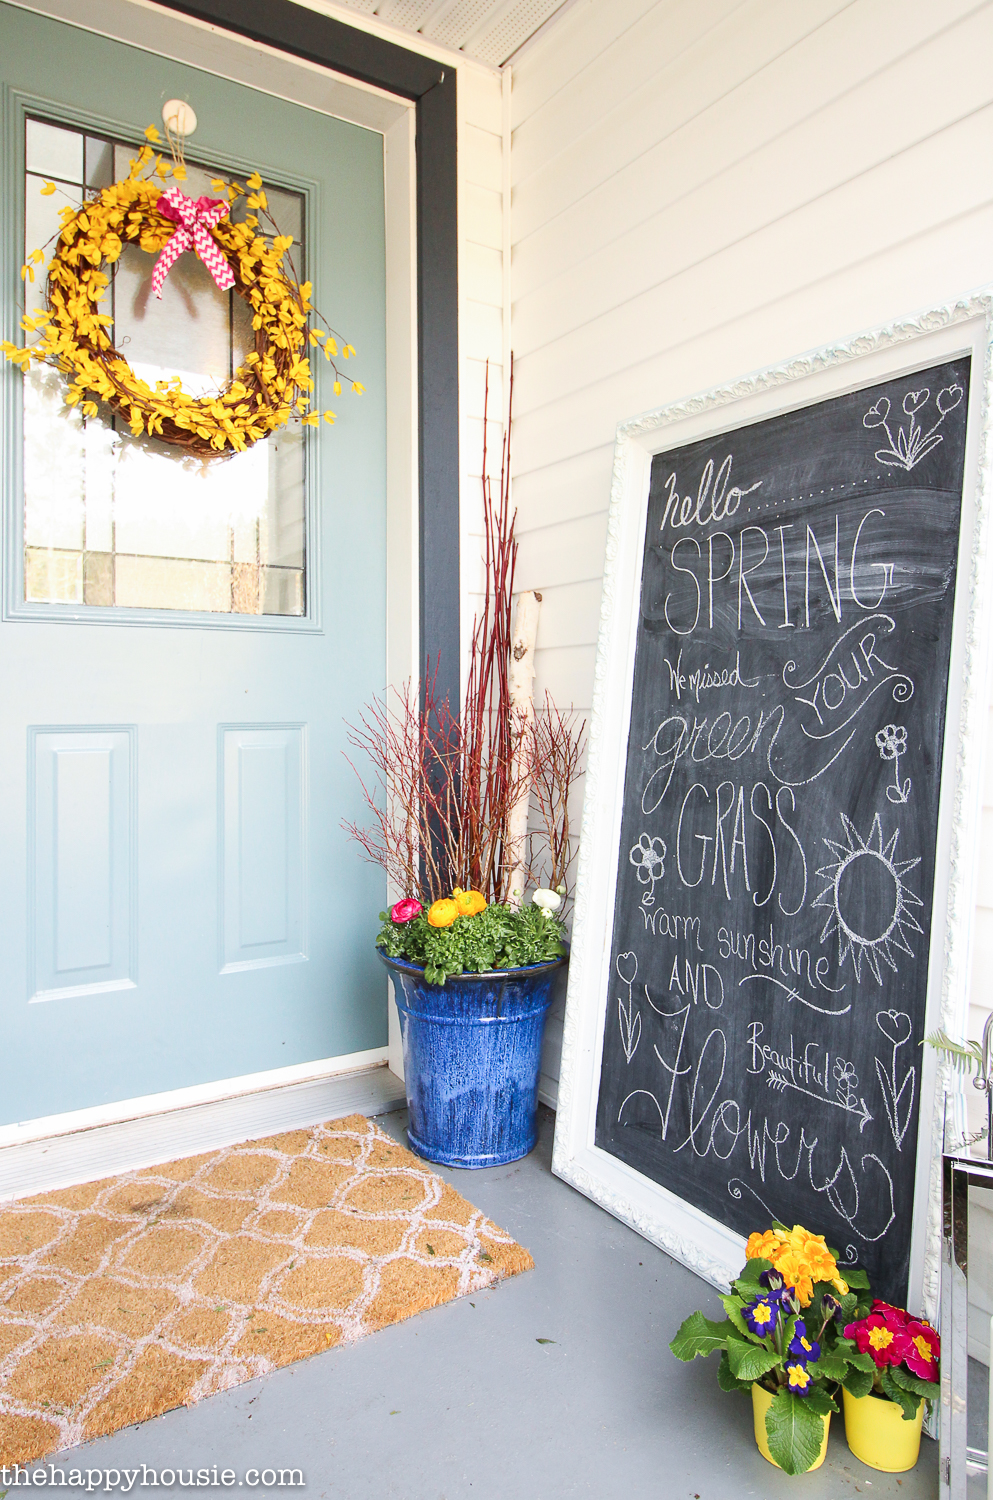 A chalkboard is on the porch with spring words and sayings on it.